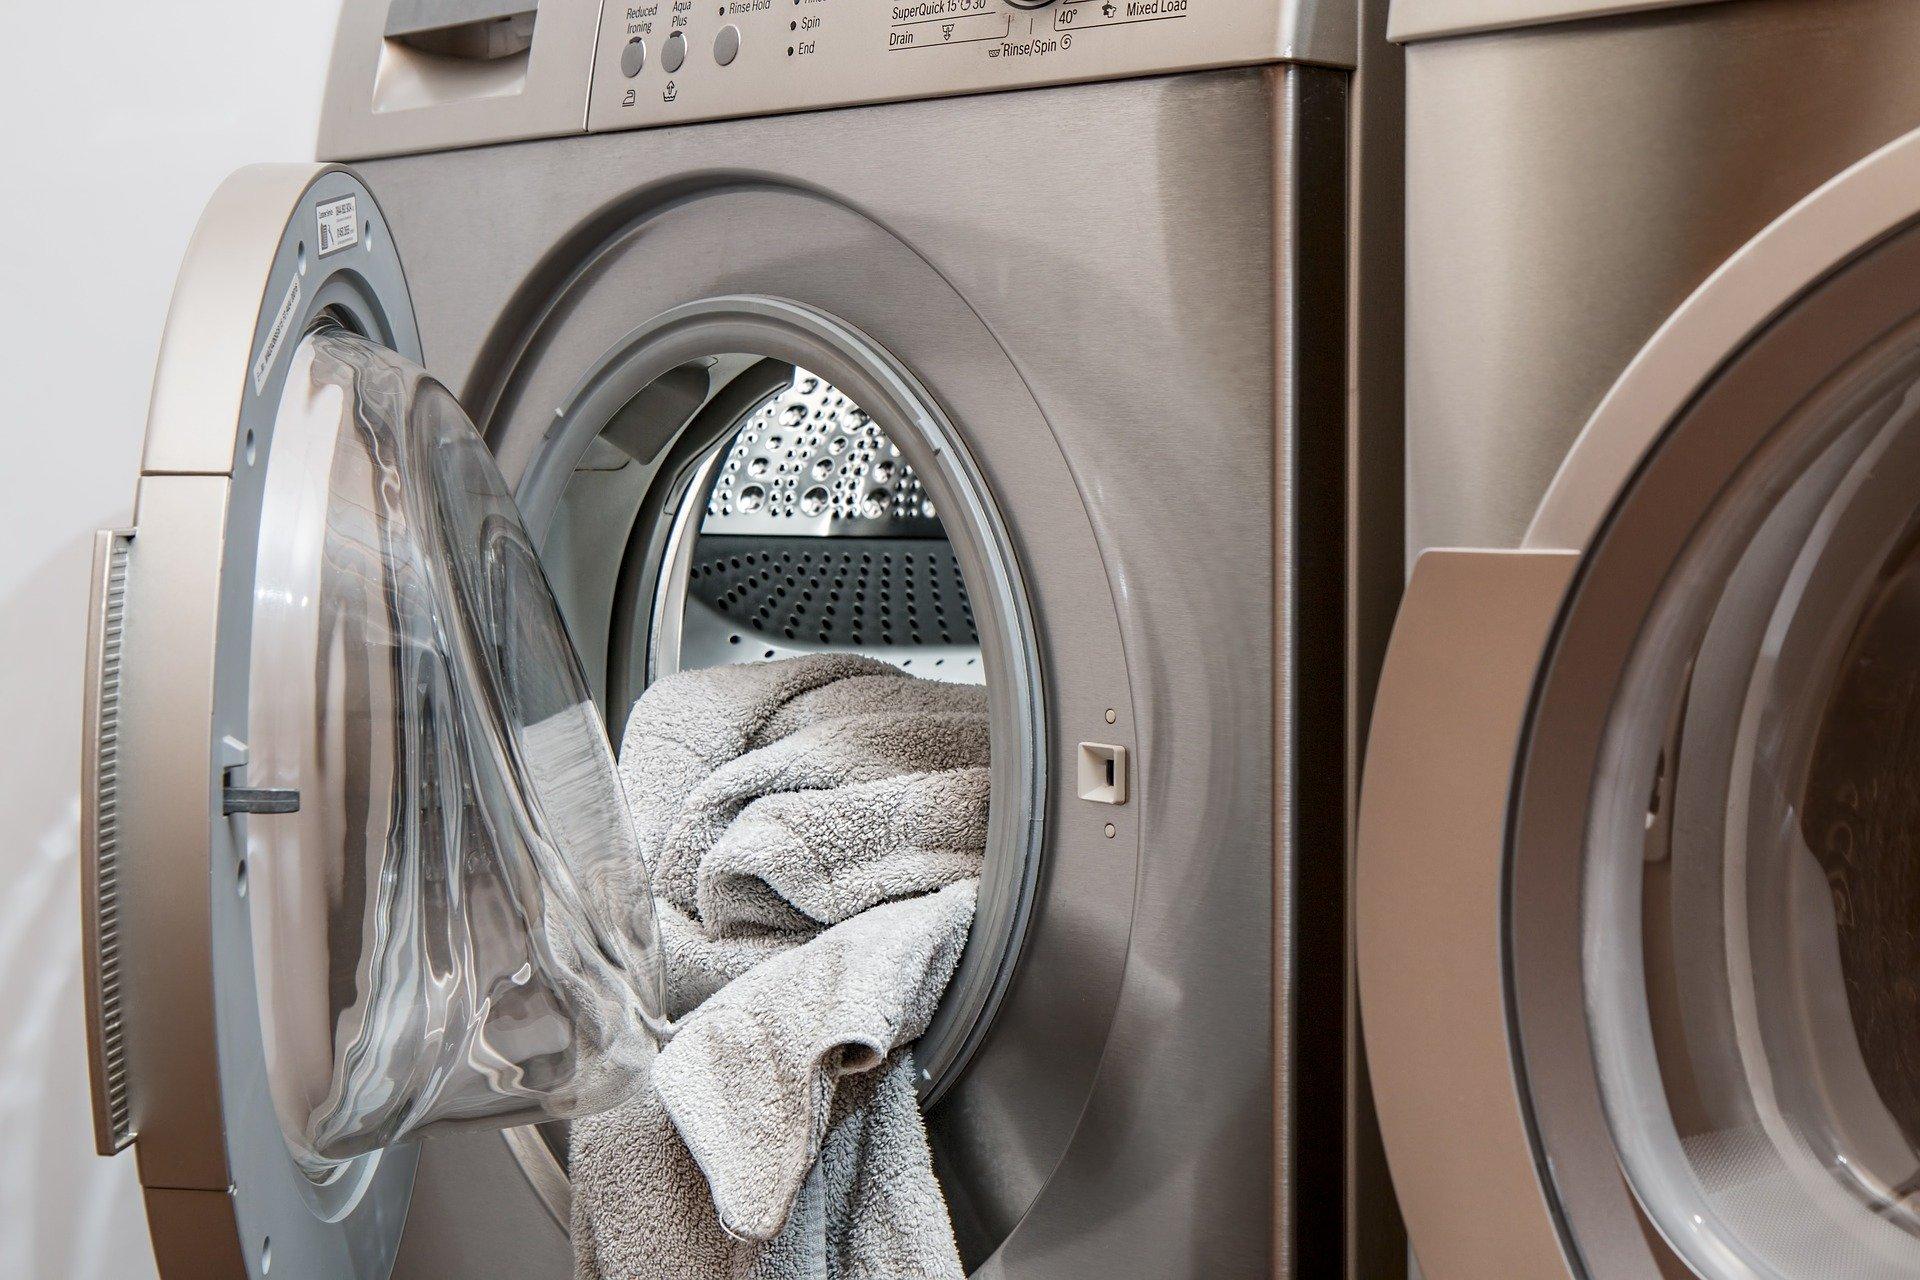  On-demand laundry app snapped up after administration